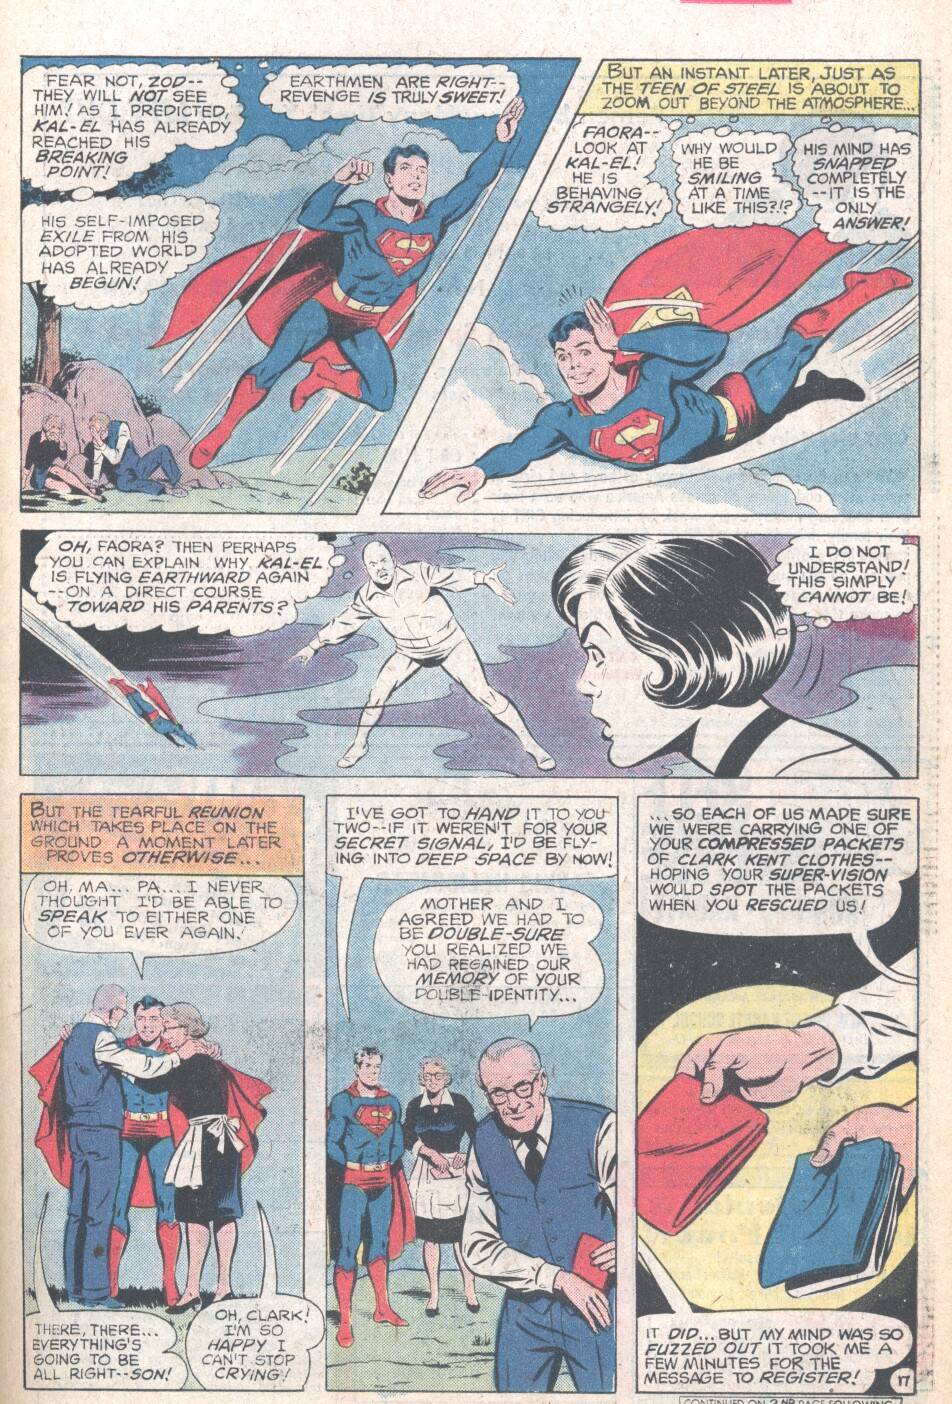 The New Adventures of Superboy 9 Page 17